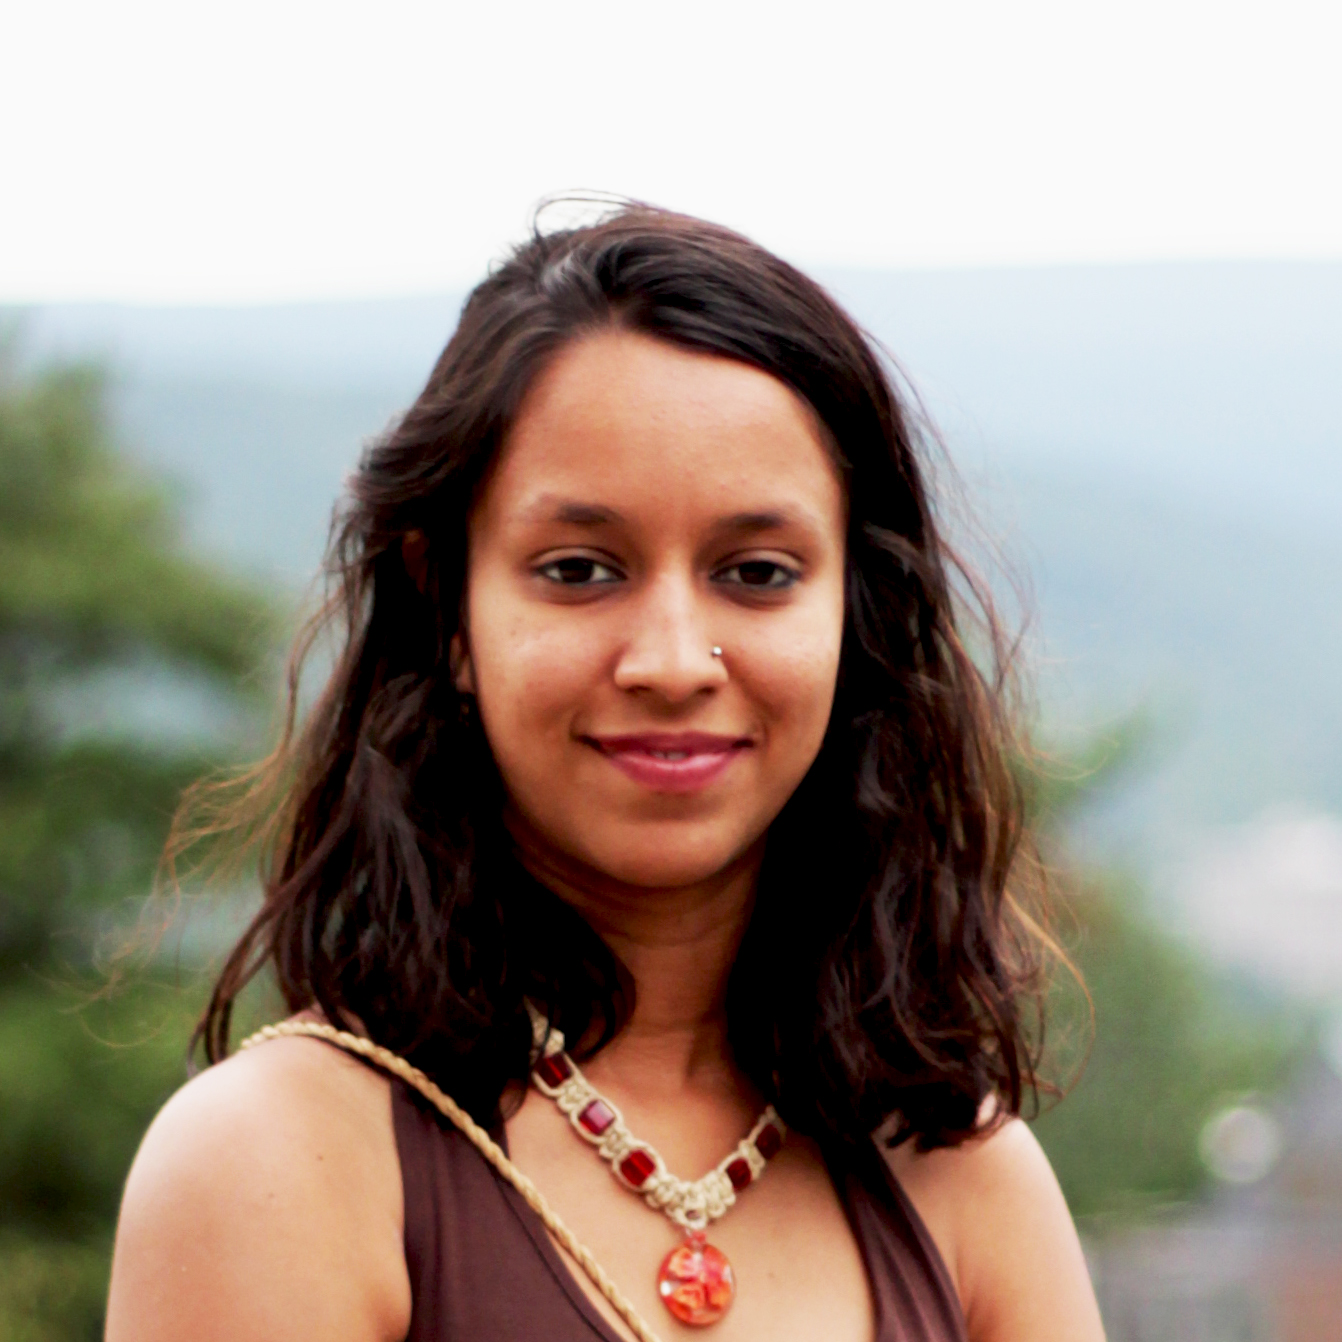 Anushi Garg, staff member of the School of Public Health at the University of Maryland 